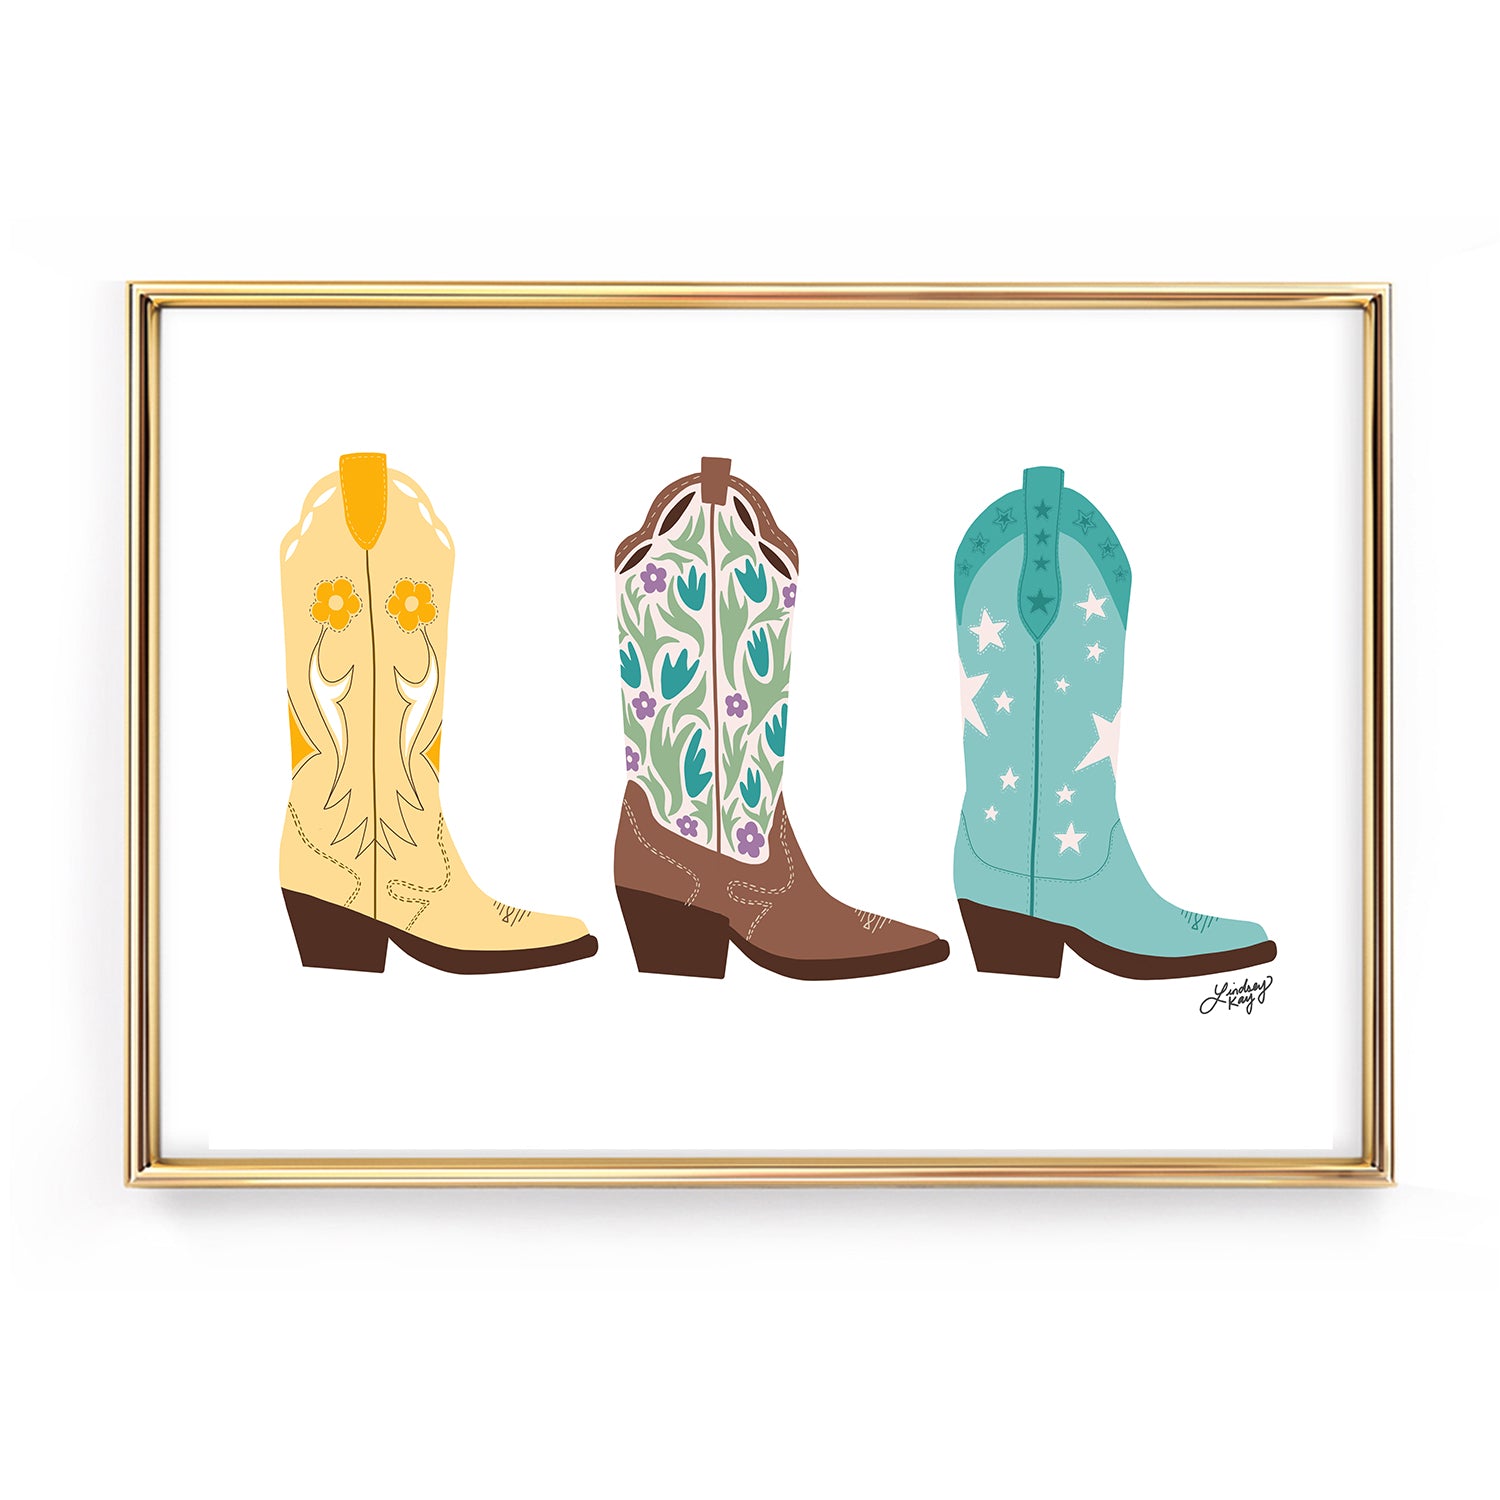 cowboy cowgirl boots blue yellow orange brown illustration art print poster wall art colorful decor artwork dorm room lindsey kay collective